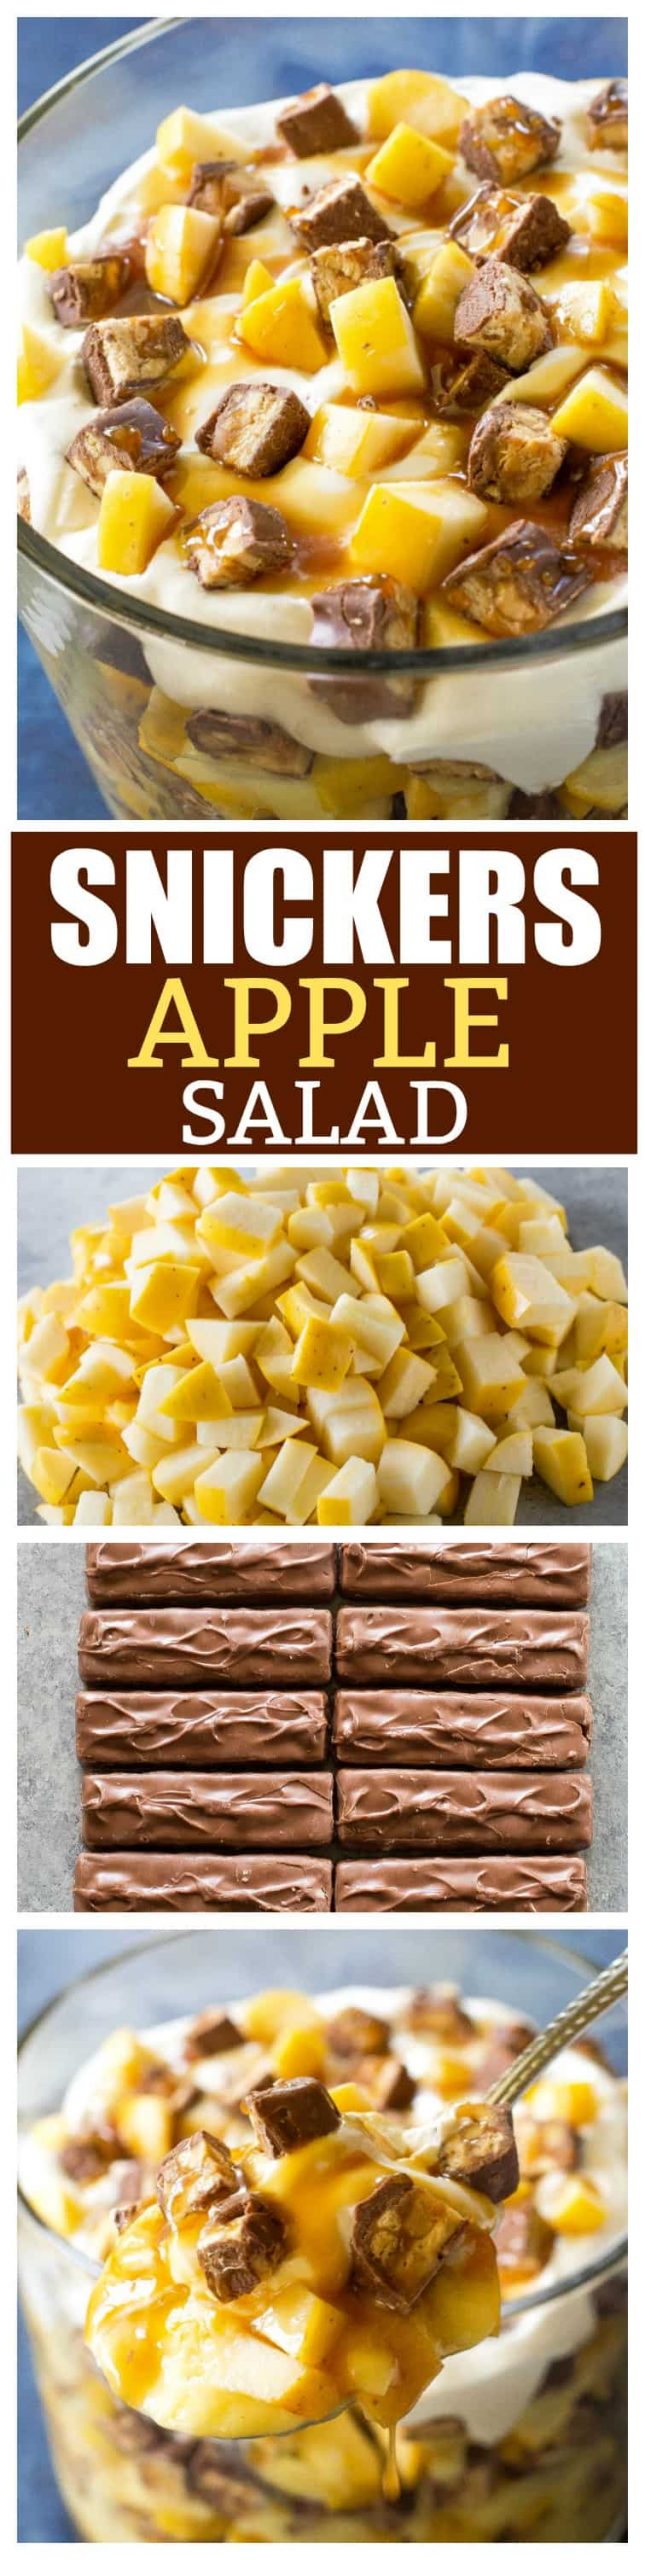 snickers apple salad scaled - Snickers Apple Salad